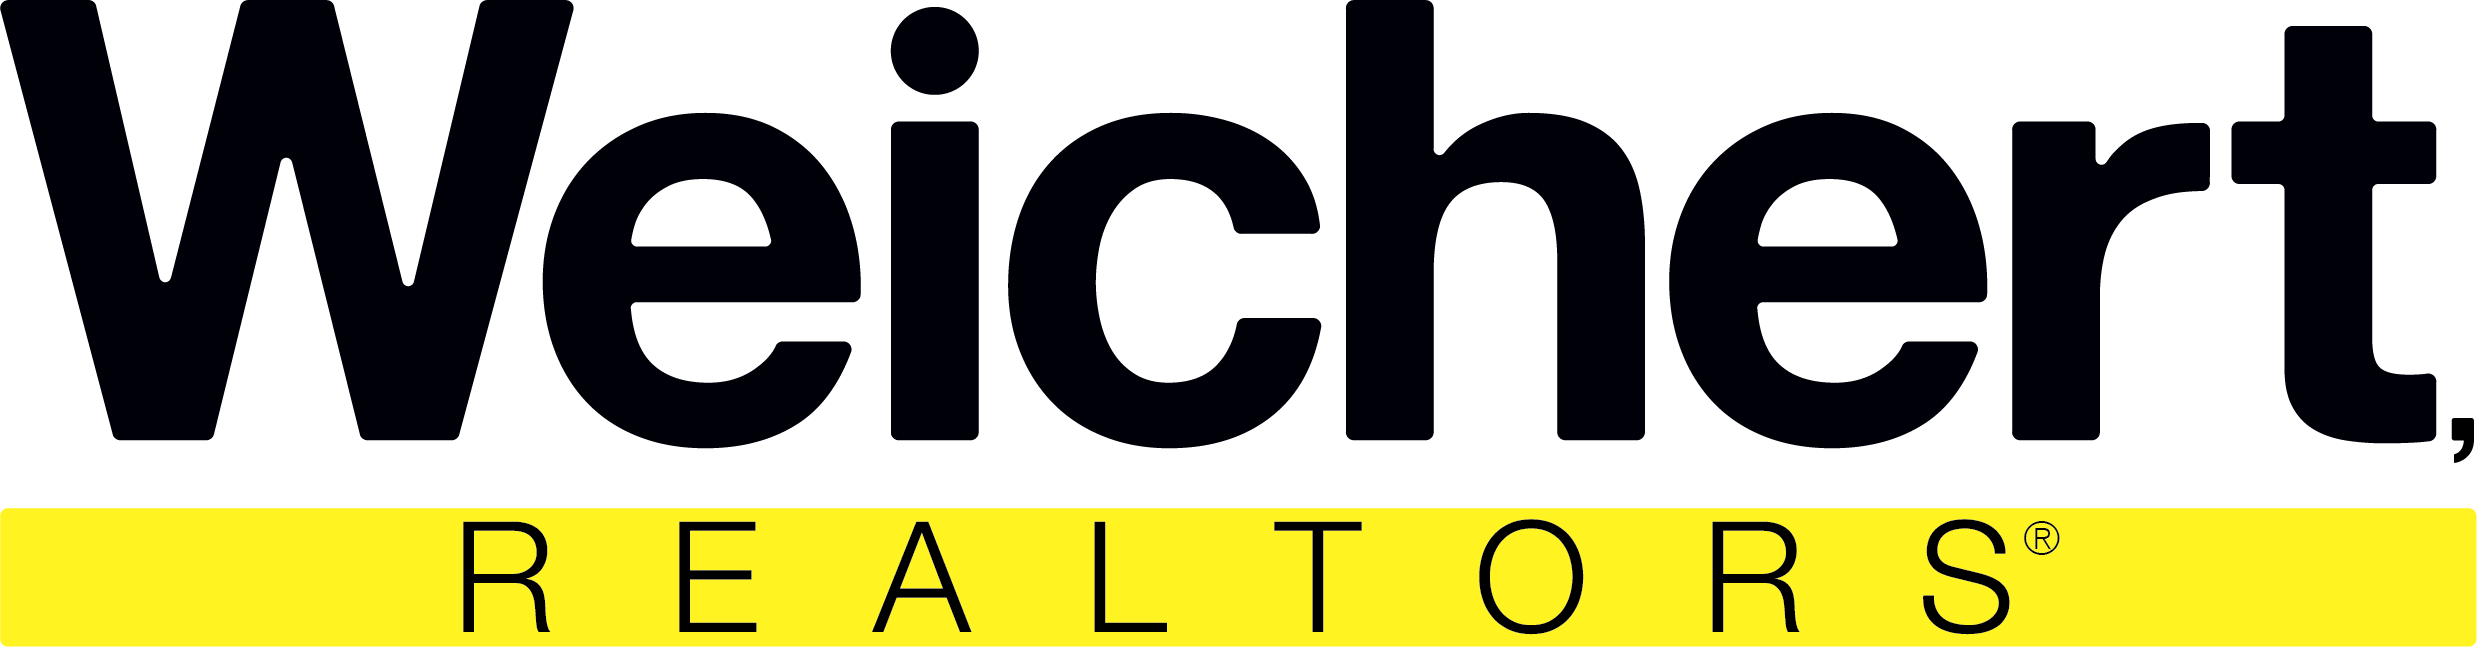 Weichert Realtors logo with black text on a transparent background and a yellow underline.